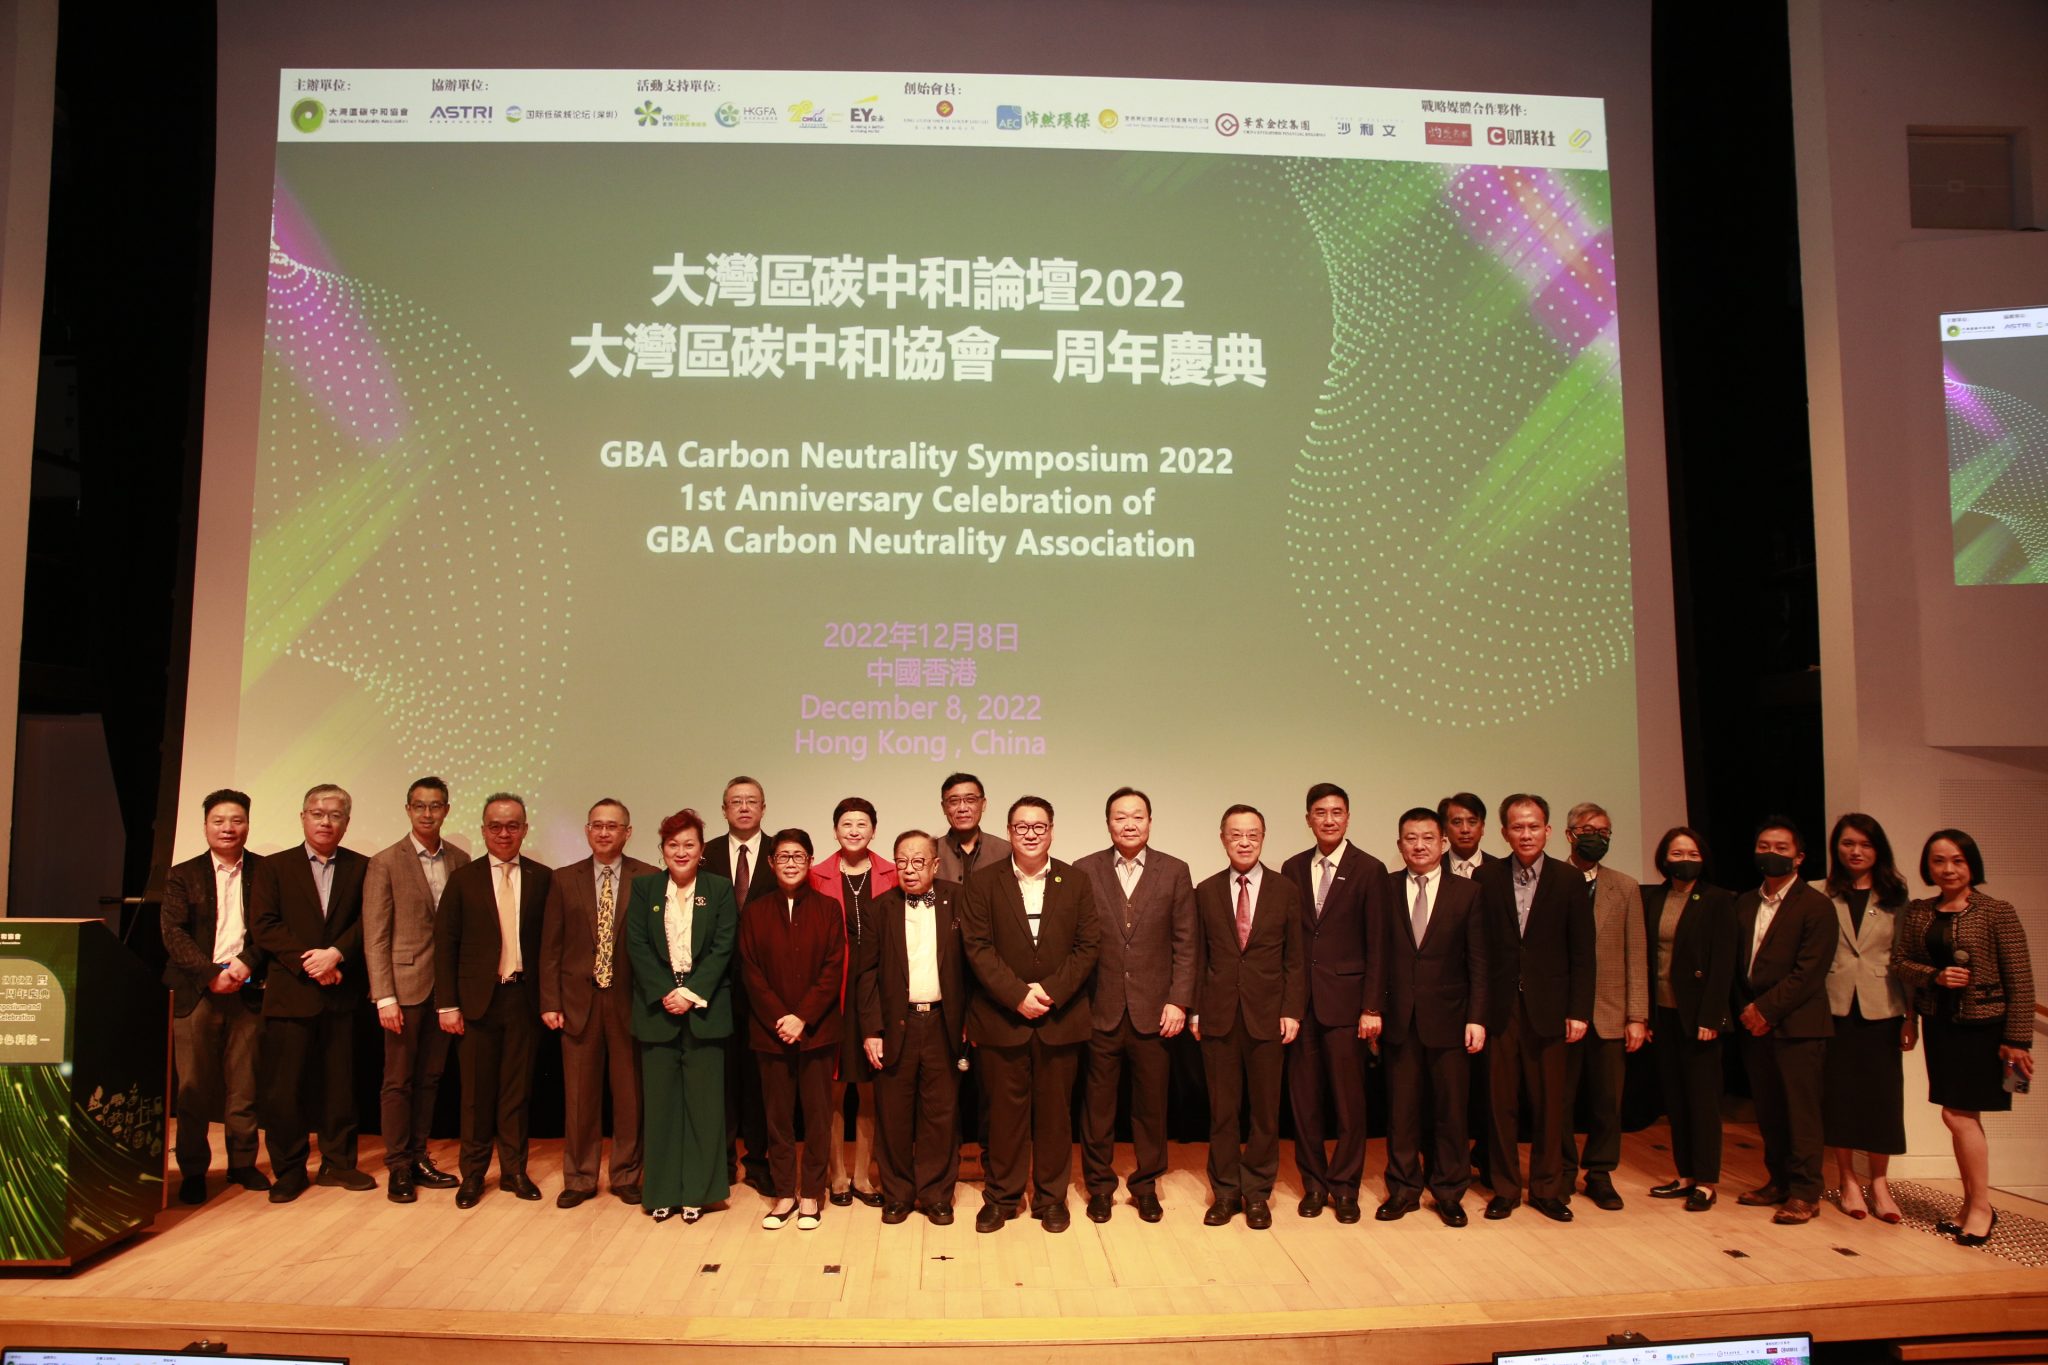 Academicians and experts participated in the ‘GBA Carbon Neutrality Symposium 2022 cum 1st Anniversary Celebration of GBA Carbon Neutrality Association”. Prof. C.C. Chan, Academician of the Chinese Academy of Engineering (left tenth); Dr. Denis Yip, ASTRI Chief Executive Officer (right ninth); Prof. Christine Loh, Chief Development Strategist, Institute for the Environment, HKUST (left eighth); Mr. Liu Zhiming, Deputy Secretary General, China Invention Association (Right tenth); Mr. Yue Yi, Honorary President, GBA Carbon Neutrality Association (Right eleventh); Mr. Dennis Wu, Founding President, GBA Carbon Neutrality Association (Right twelfth); Mr. Xu Zhuliang, Vice-President, GBA Carbon Neutrality Association (Left seventh); Ms. Grace Kwok, Vice-President, GBA Carbon Neutrality Association (right forth); Mr. Geng Guohua, Vice-President, GBA Carbon Neutrality Association (right eight); Ms. Ng Man, Vice-President, GBA Carbon Neutrality Association (left sixth); Ms. Tseng Chin I, Vice-President, GBA Carbon Neutrality Association (right first); Mr. Man Cheuk Fei, Vice-President, GBA Carbon Neutrality Association (right sixth); Mr. Ricky Lau, Vice-President, GBA Carbon Neutrality Association (right third); Ms. Law Yee Ping, Secretary General, GBA Carbon Neutrality Association (left ninth); Dr. Kenny Siu, Board member, GBA Carbon Neutrality Association (right seventh); Mr. Emil Chan, Chairman, FinTech Committee of SCC (left eleventh); Mr. Benson Ng, President, Hong Kong Association of Solar Energy Industry (left fifth); Ms. Zoe Zhao, founder, RE-LOOK (right second)